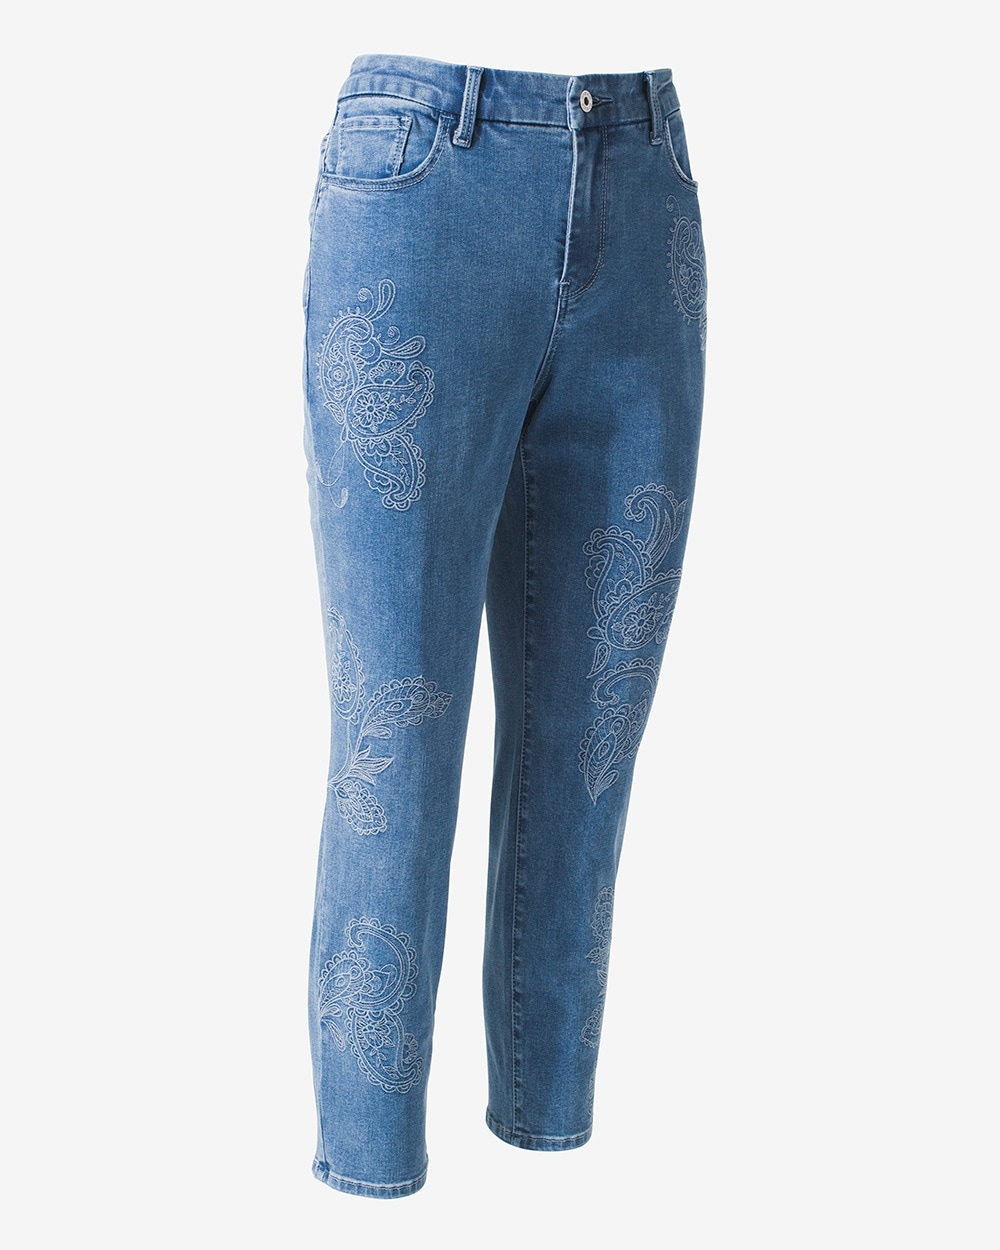 Paisley Embroidery Girlfriend Jeans